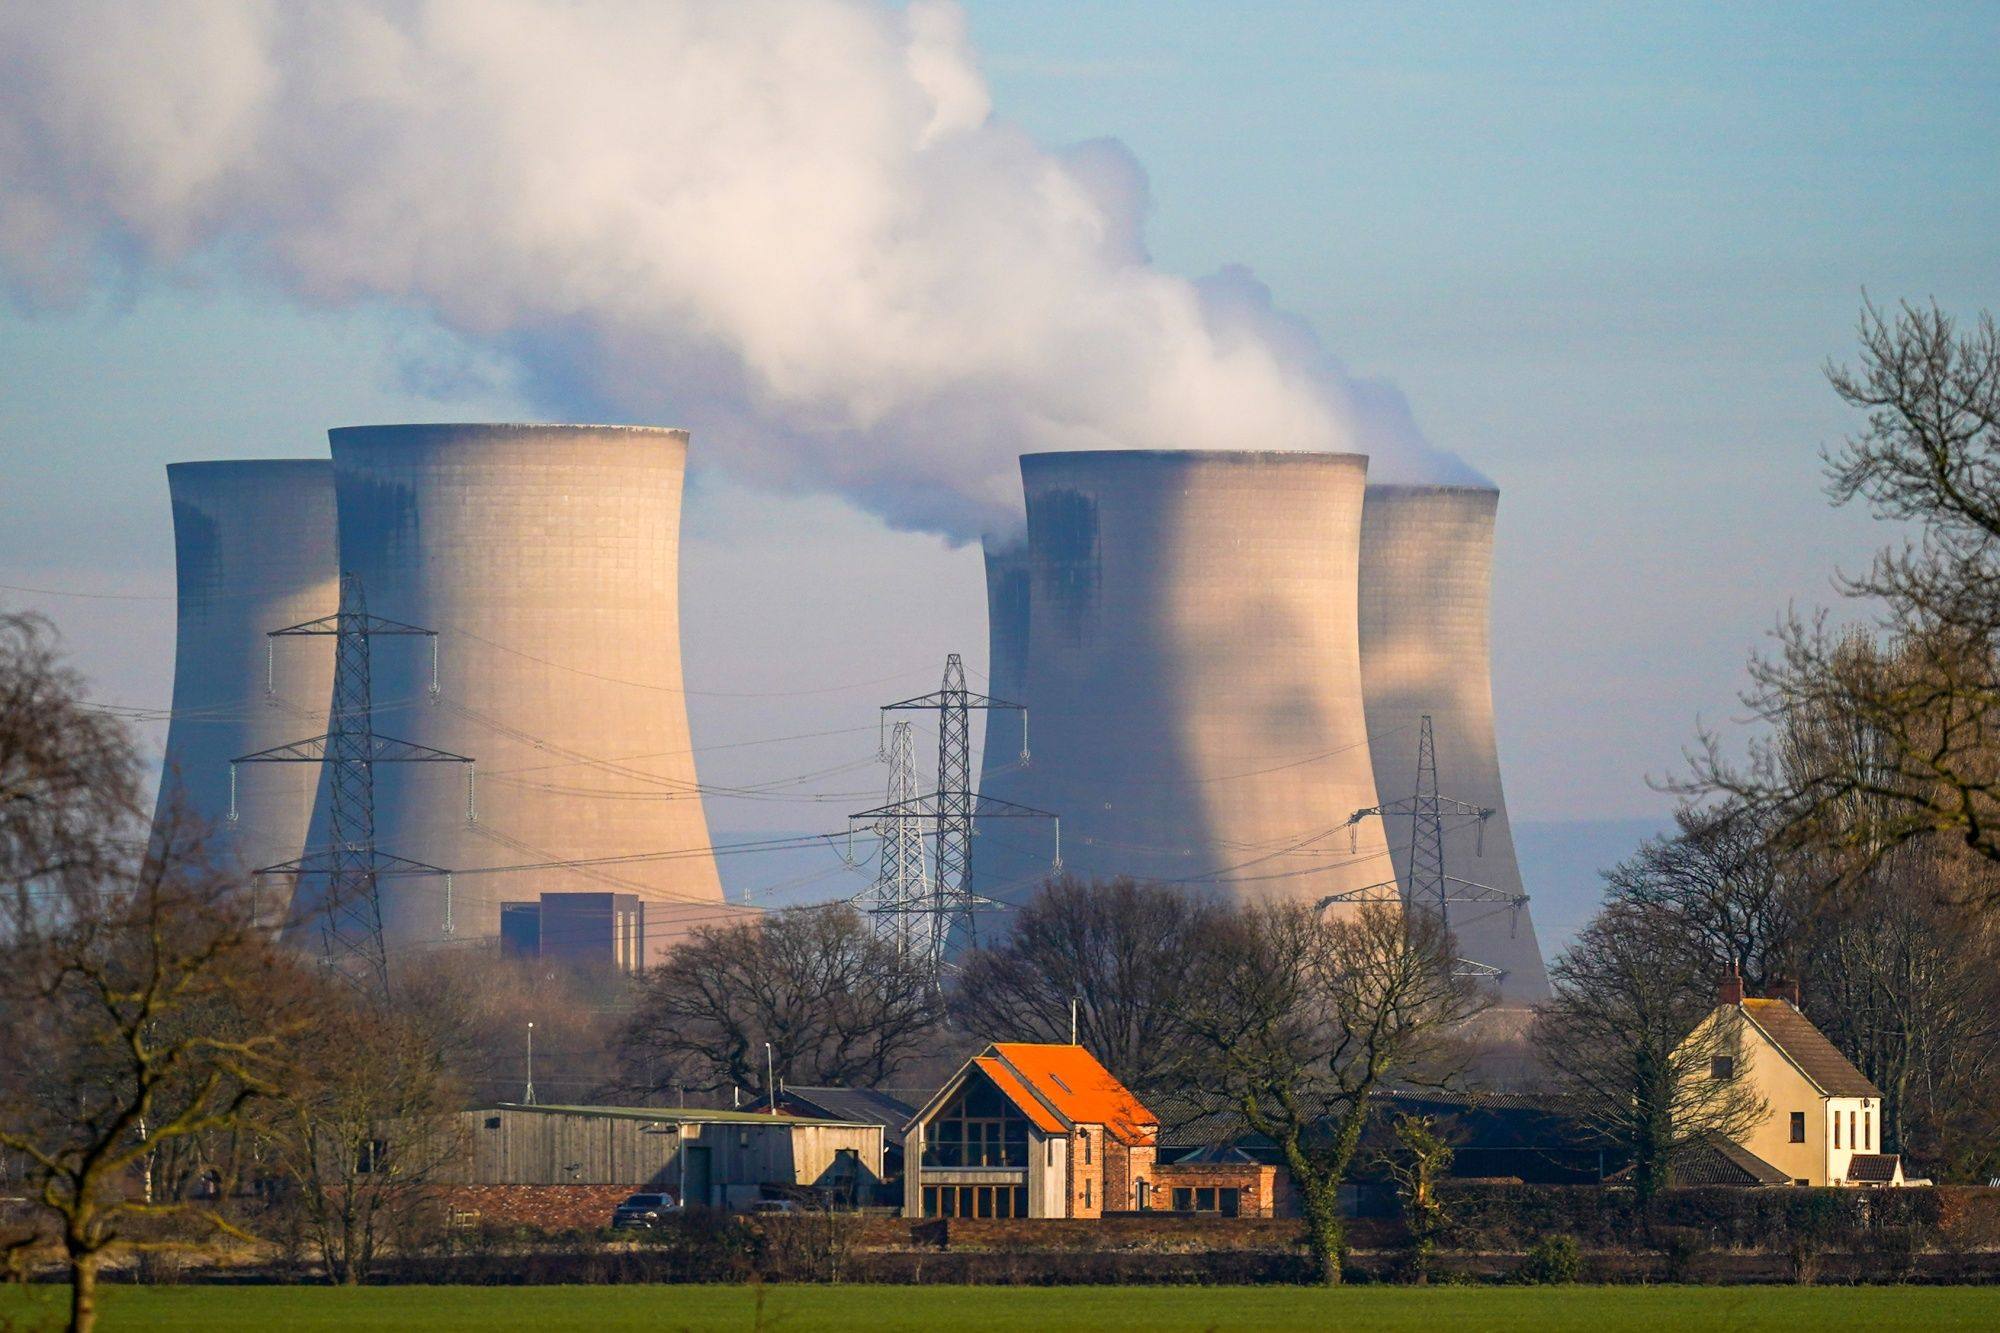 Cooling towers are seen on January 23 at Drax Power Station, near Selby, UK, where coal-fired units 5 and 6 have been put on standby to generate electricity supplies during a cold snap. Global consumption of coal hit a record high in 2022 despite the recognised need to shift away from fossil fuels. Photo: Bloomberg